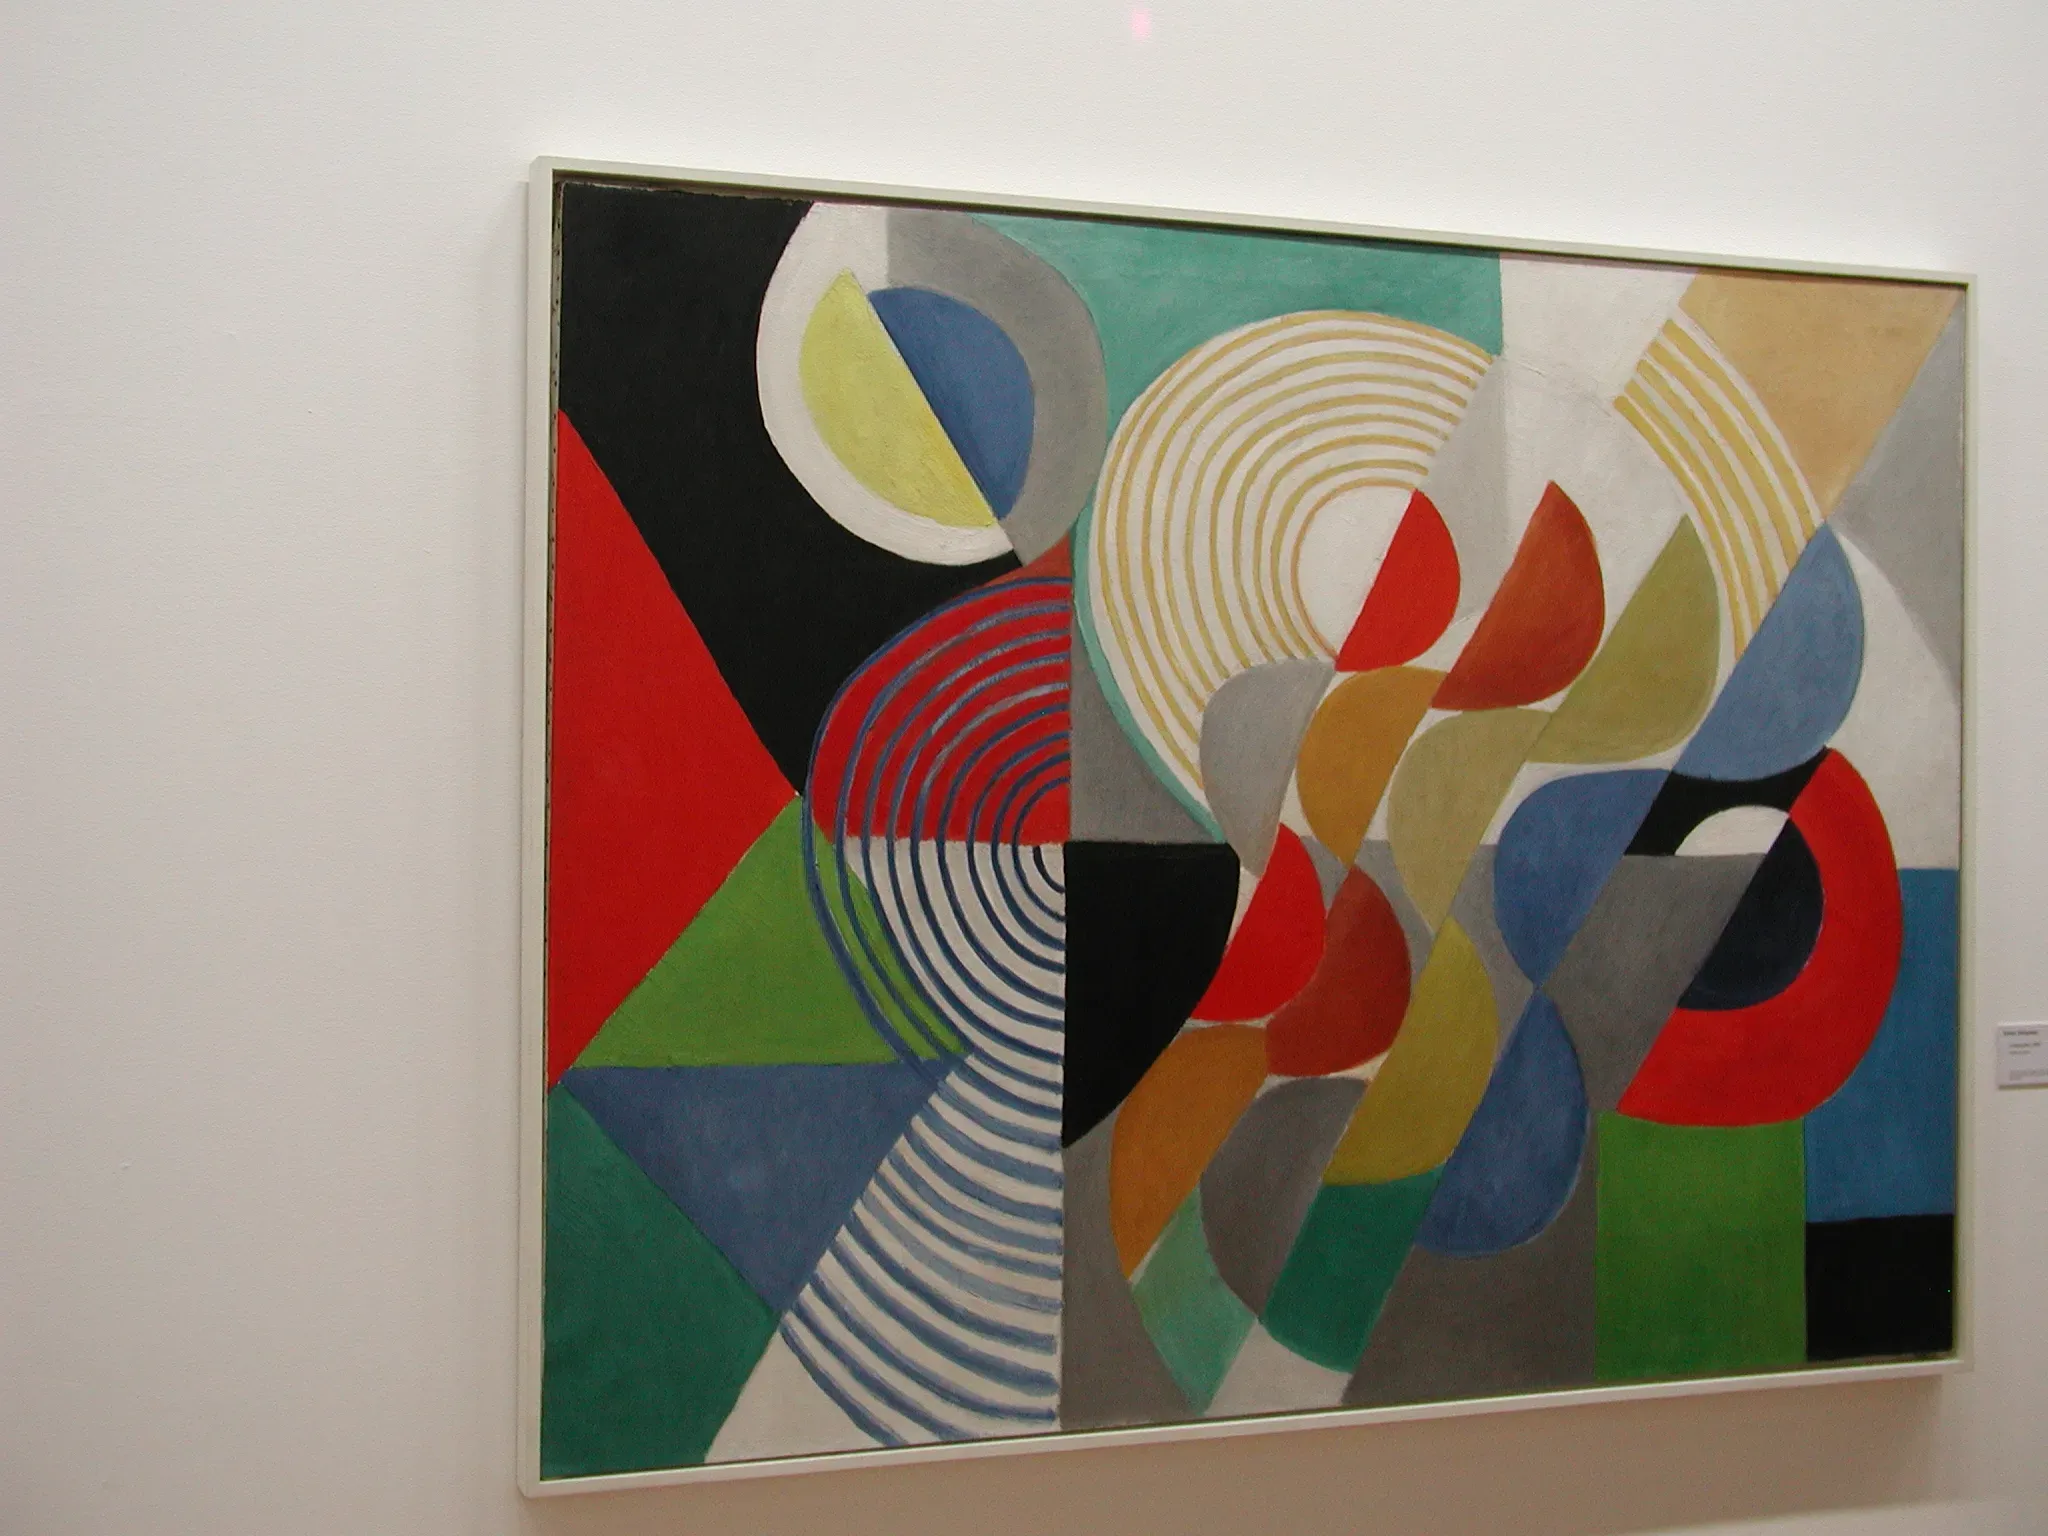 By Sonia Delaunay at Musée National Art Moderne